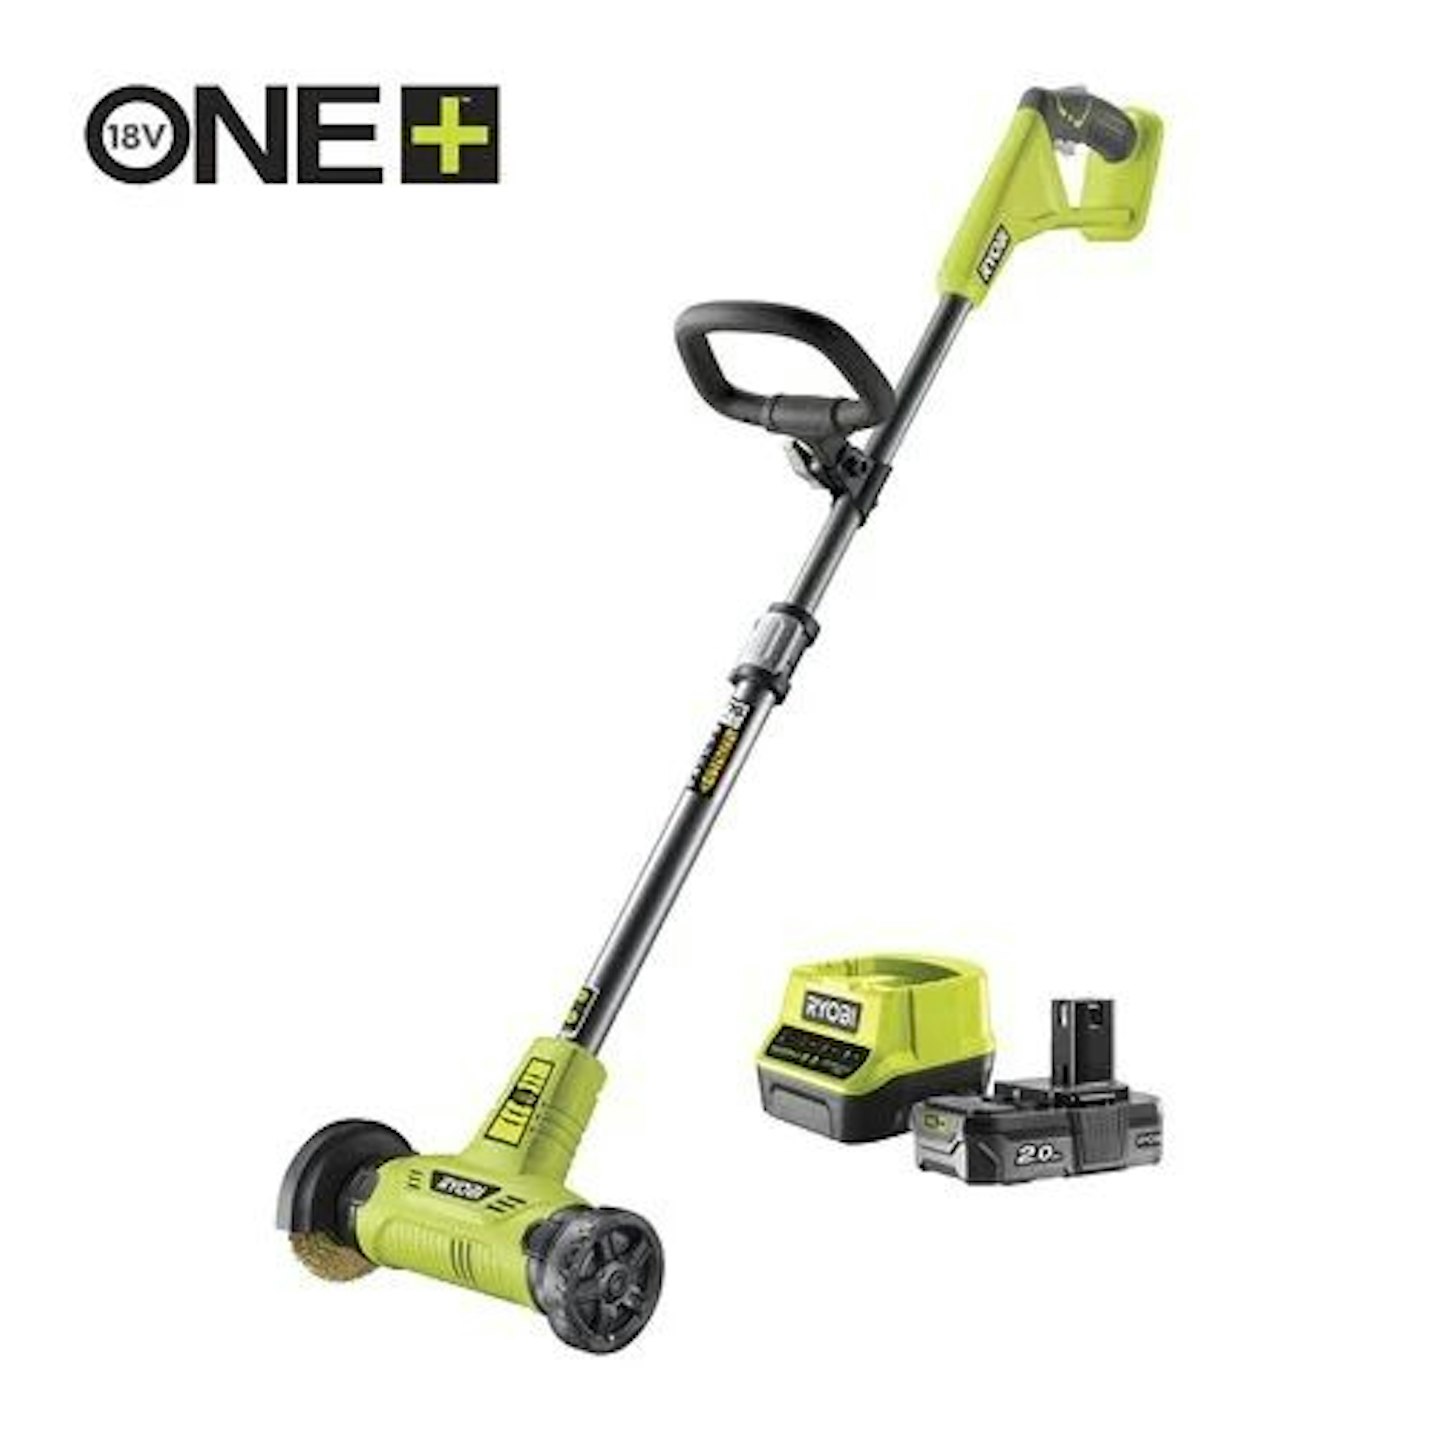 18V ONE+™ Cordless Patio Cleaner with Wire Brush